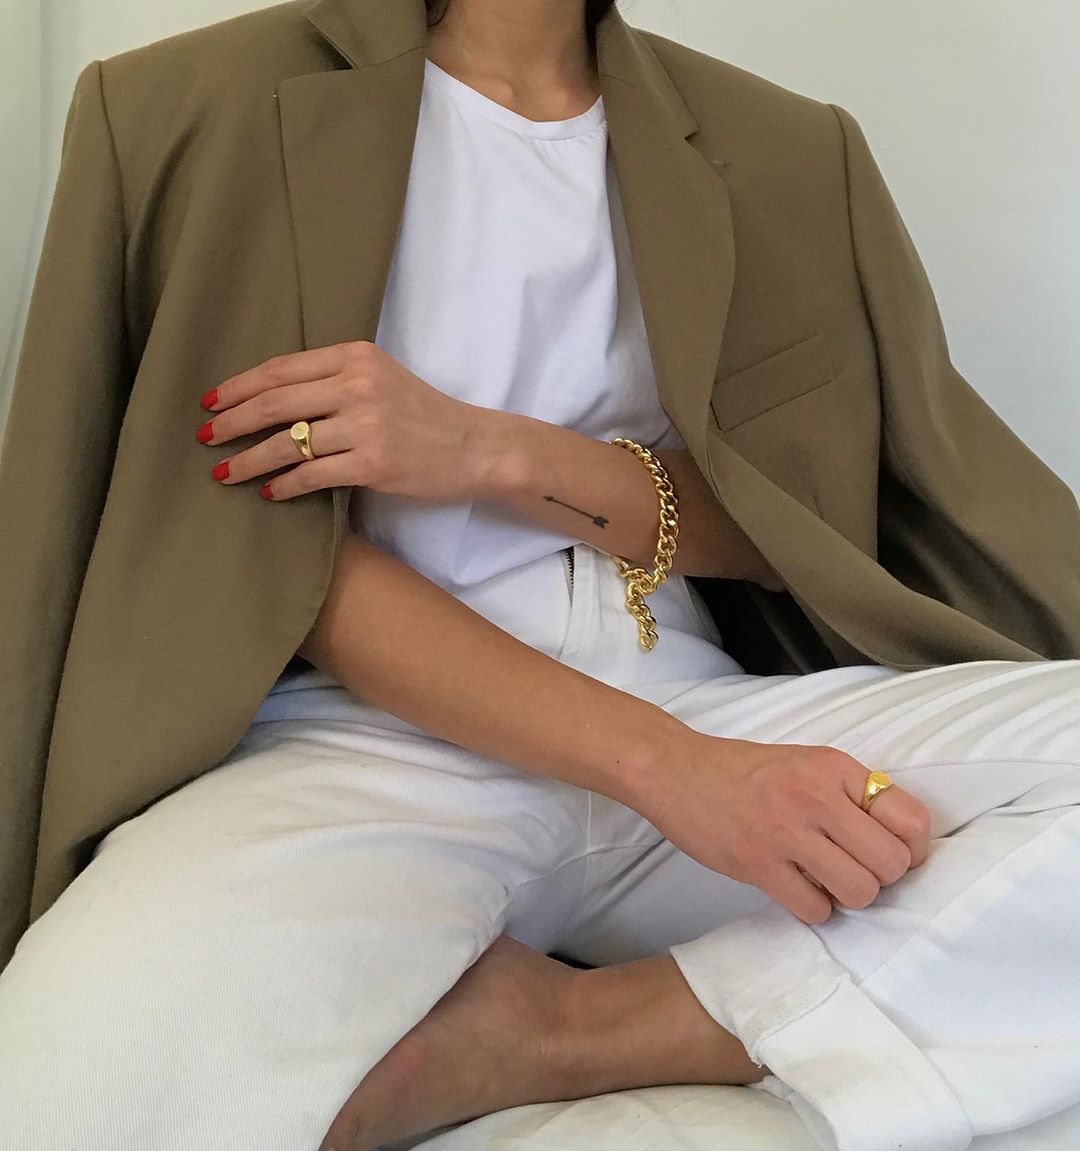 This Instagram Outfit Makes Me Want a Neutral Blazer